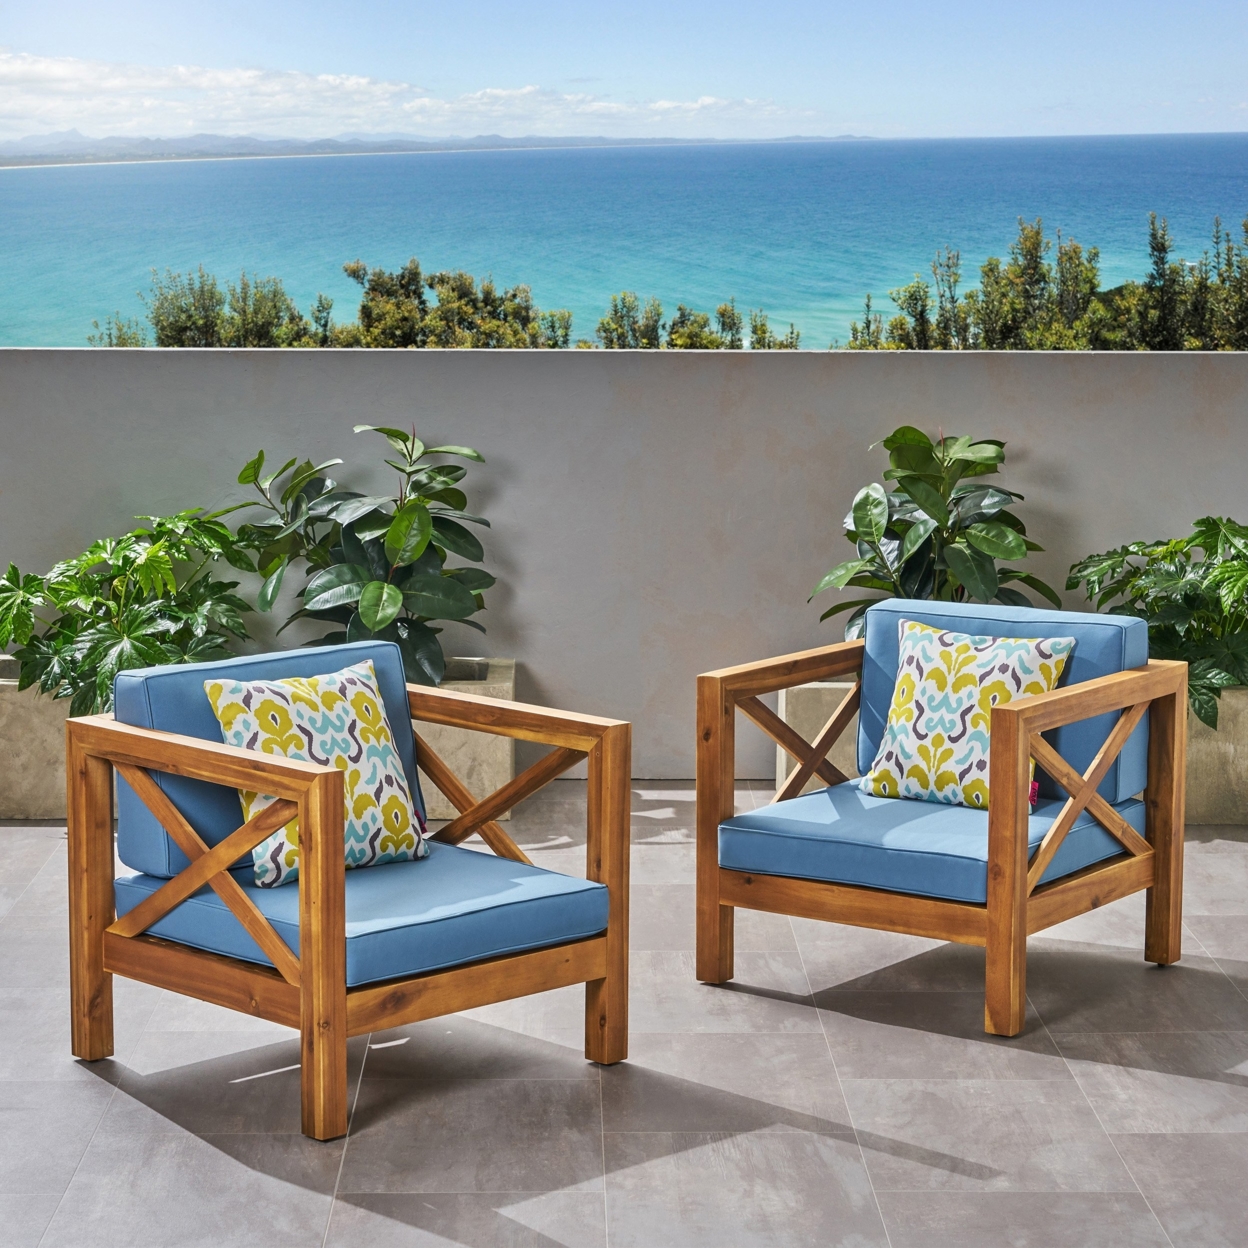 Indira Outdoor Acacia Wood Club Chairs With Cushions (Set Of 2) - Gray + White